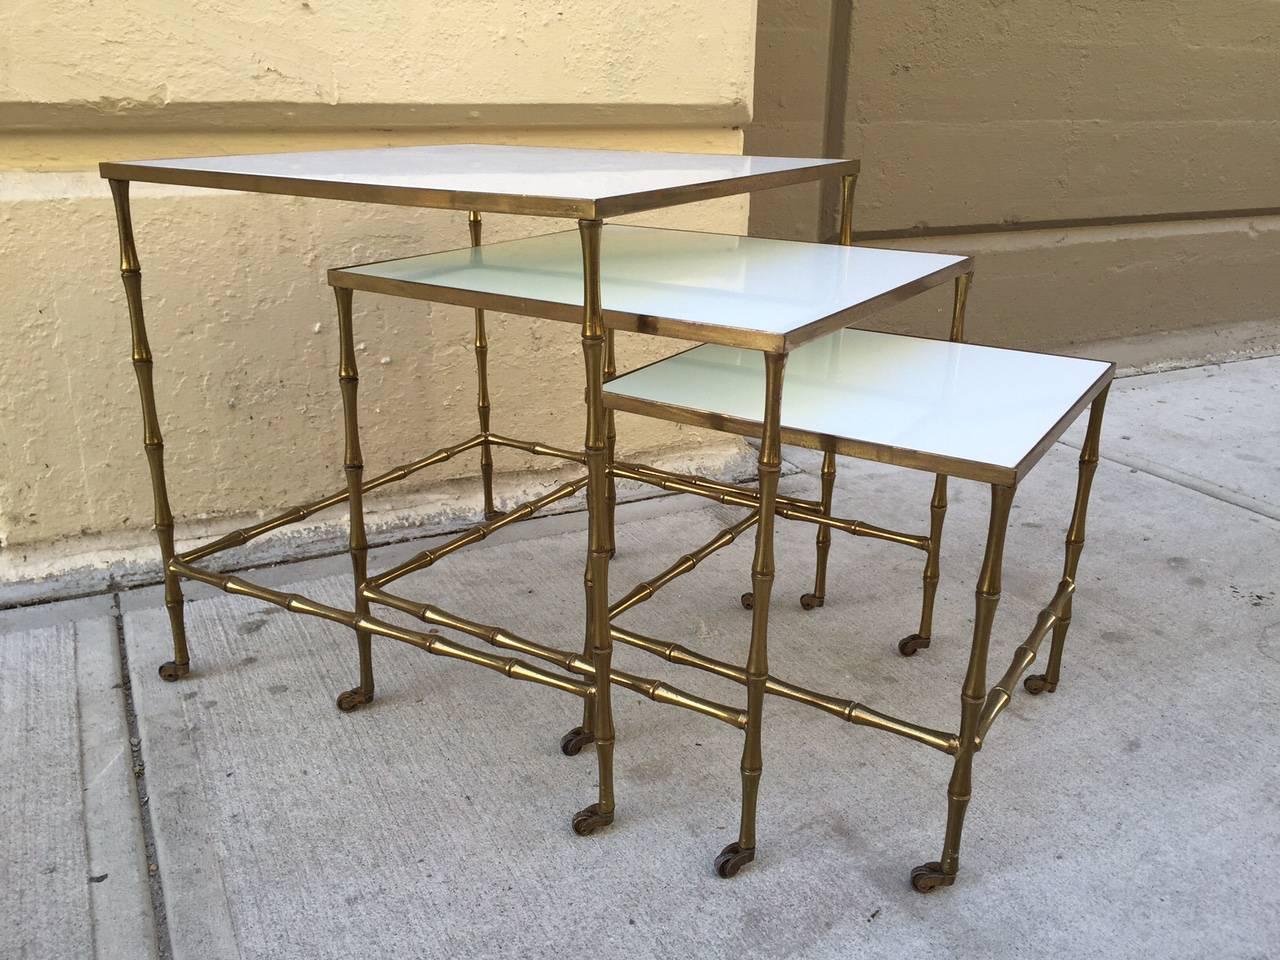 Bronze nesting tables by Maison Bague`s. Tables have bronze, faux bamboo frame on casters with milk glass tops.
Larger table measures: 19